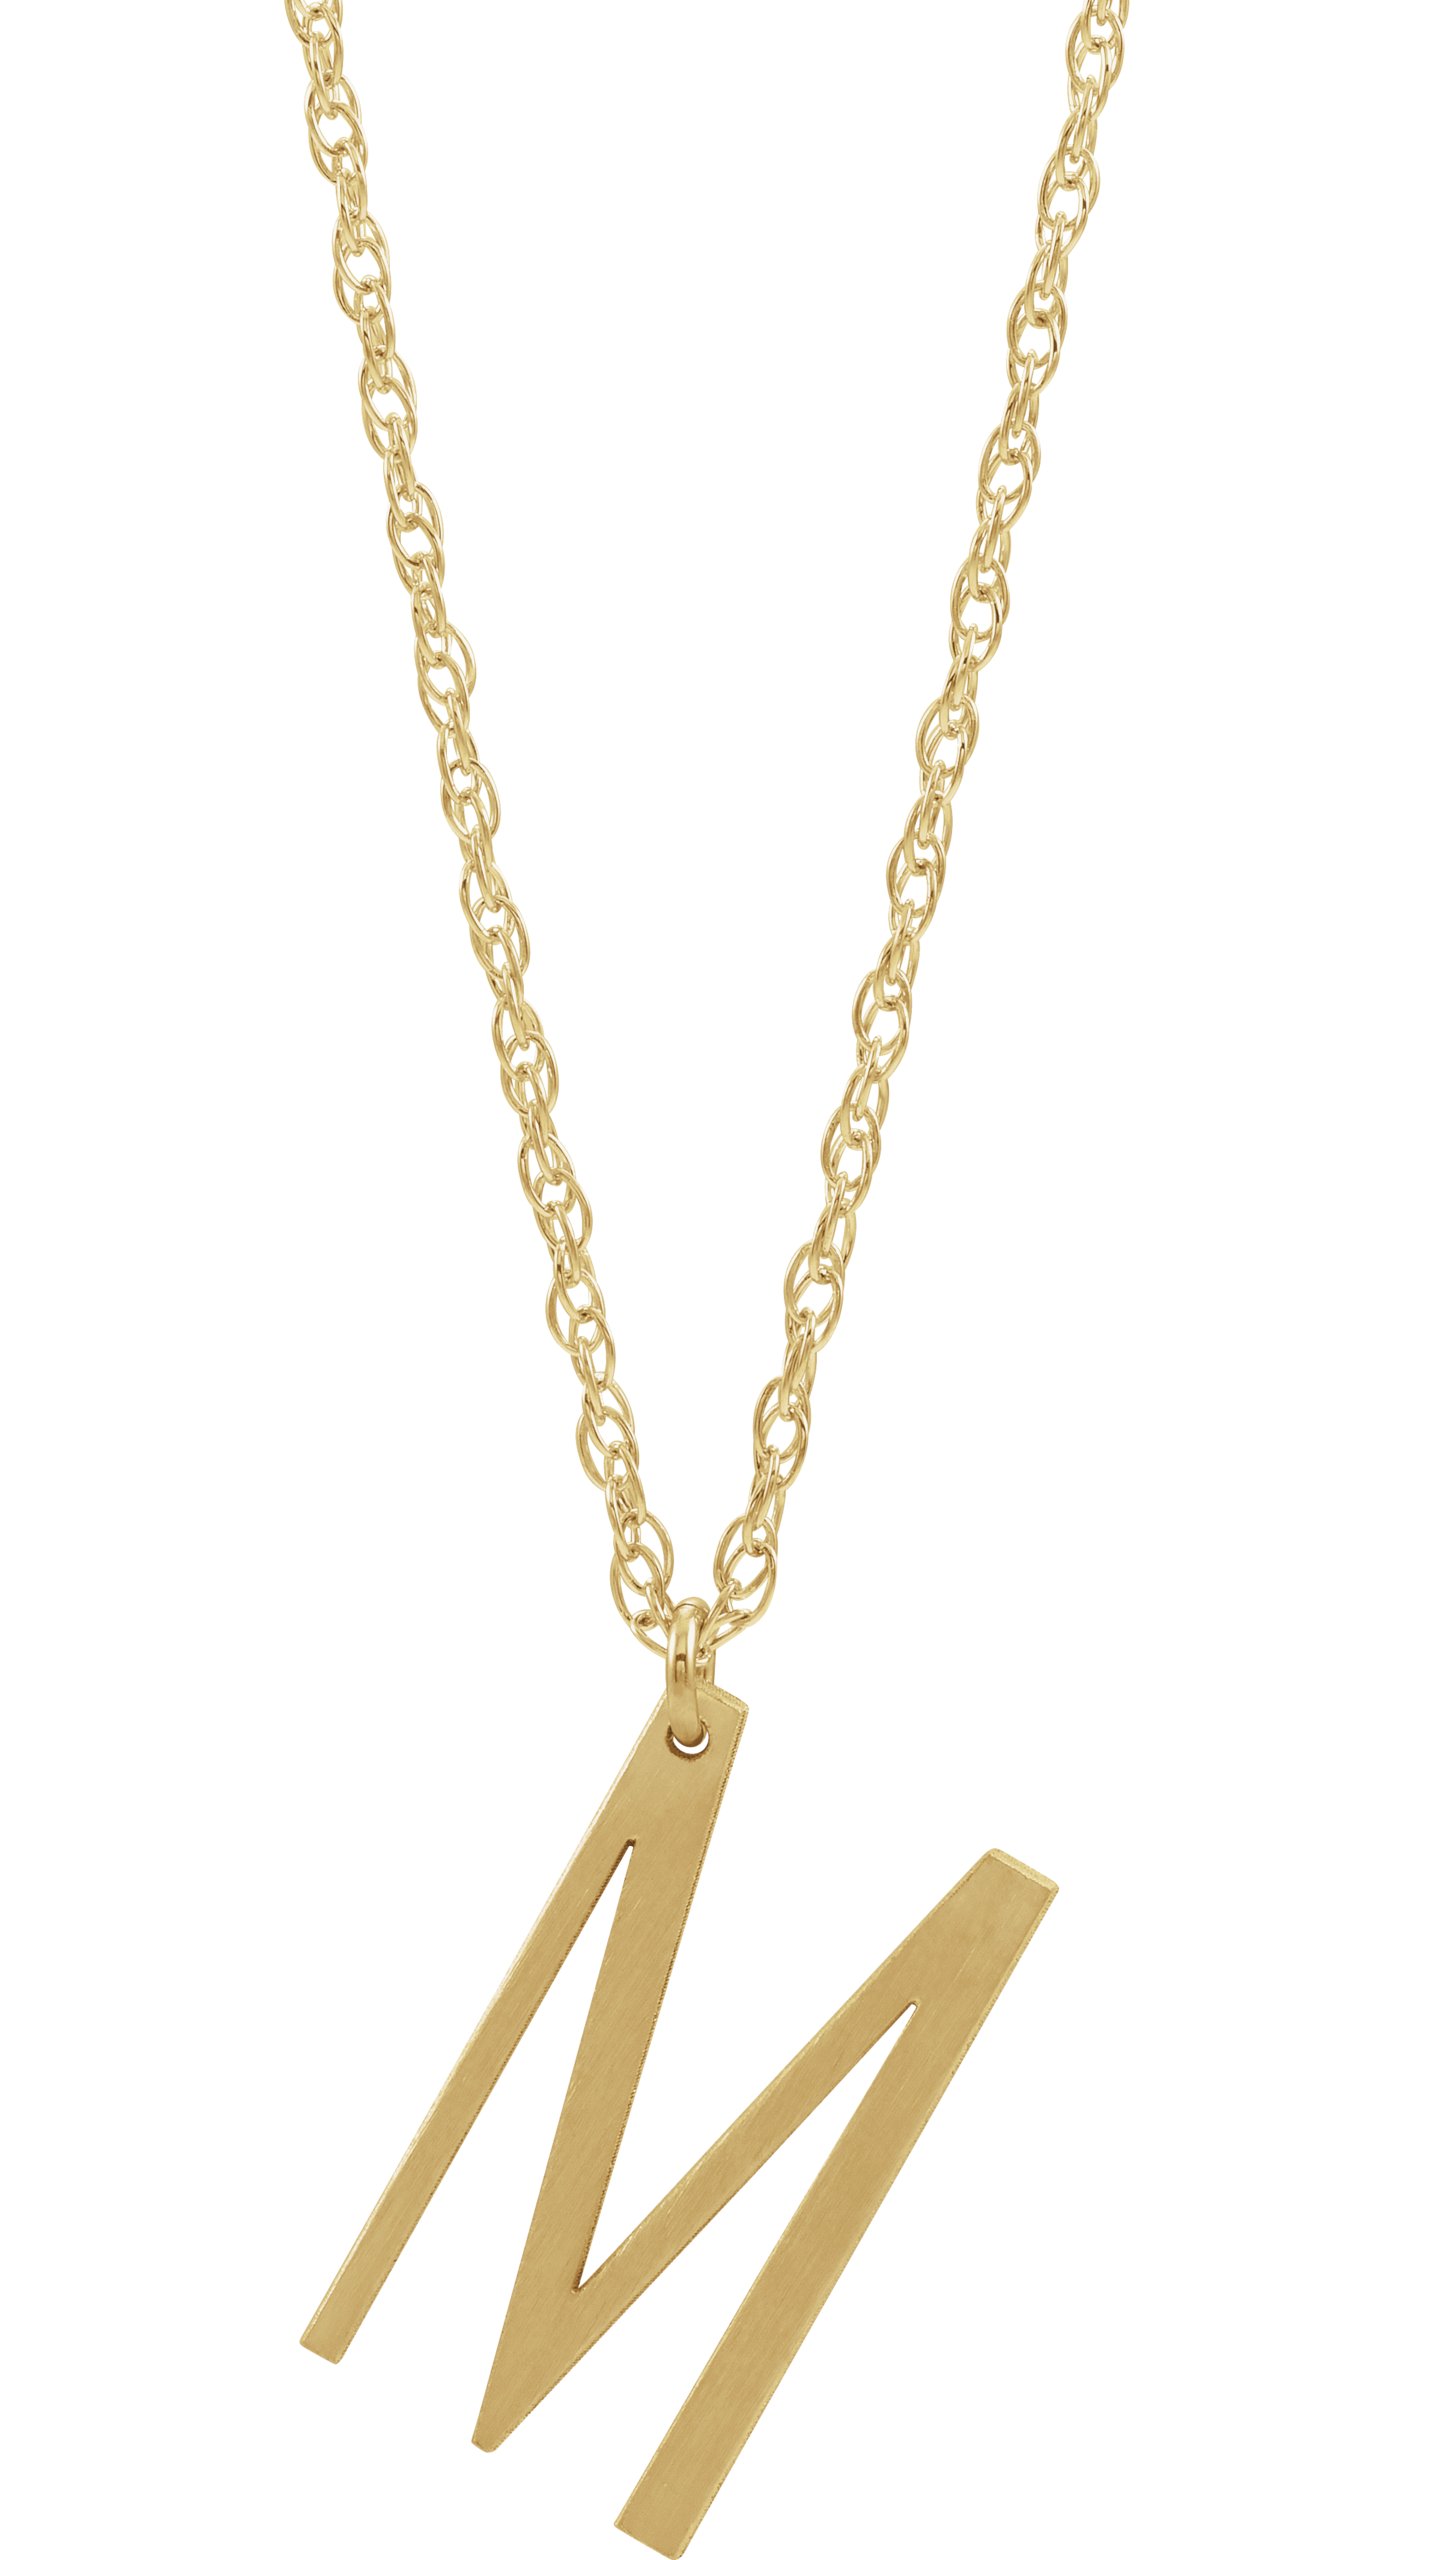 14K Yellow Gold-Plated Sterling Silver Block Initial M 16-18" Necklace with Brush Finish